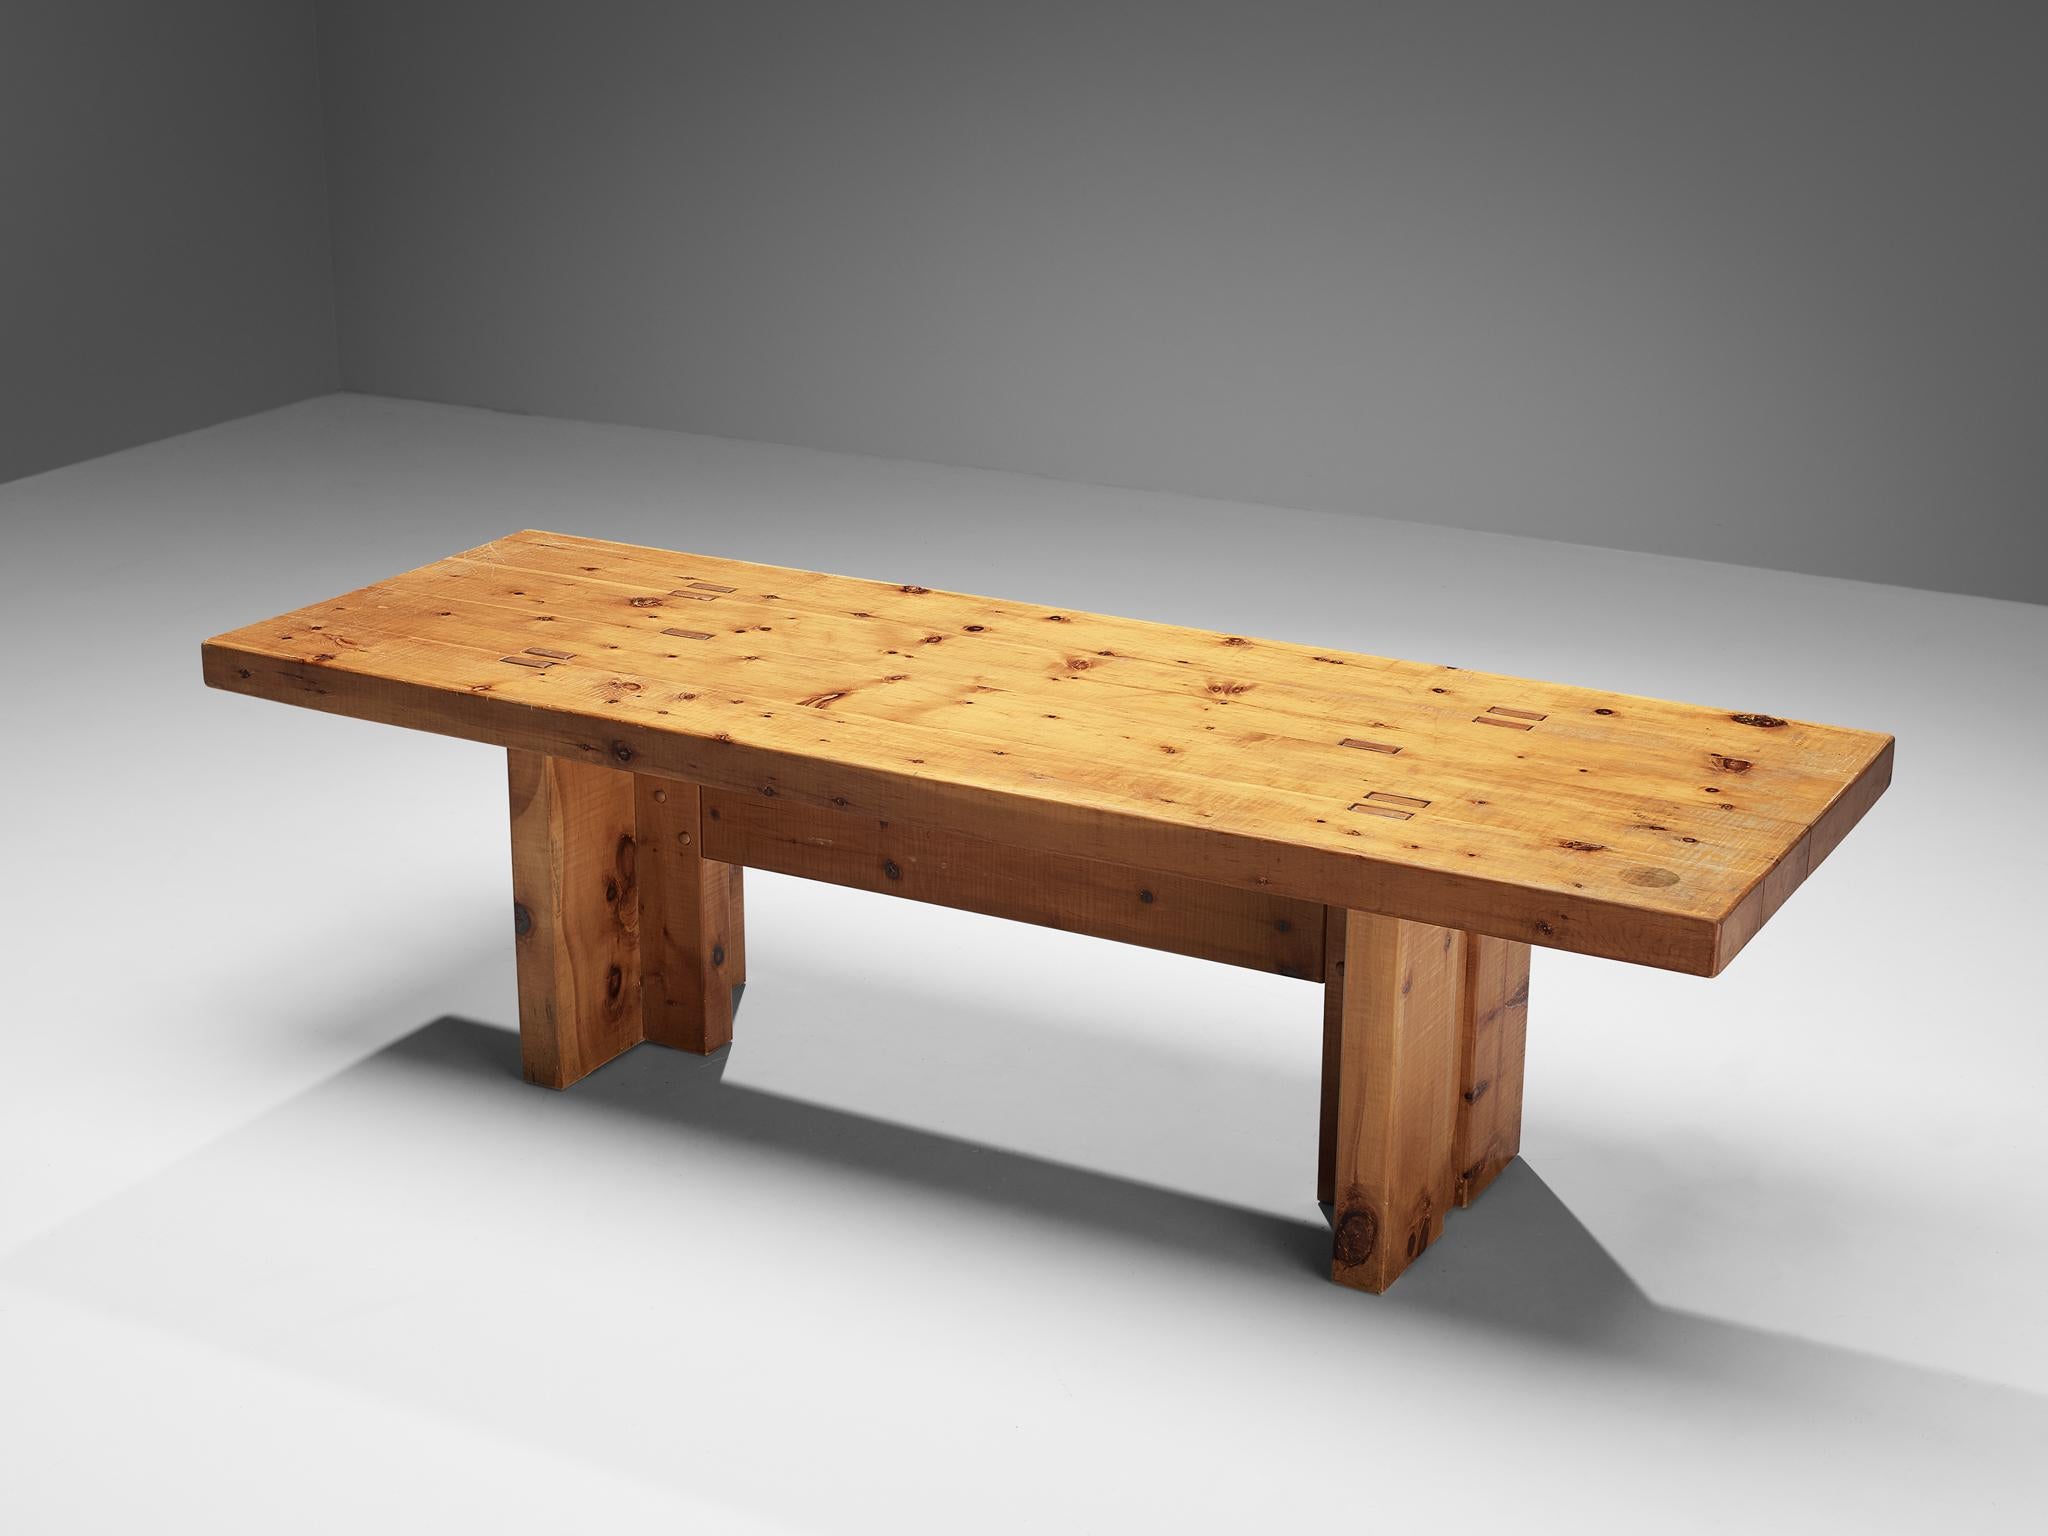 Giuseppe Rivadossi for Officina Rivadossi, dining table, pine, Italy, 1980s

Giuseppe Rivadossi once again proves his great eye for materialization and technicality this table is exemplary for. The table is architecturally built based on the